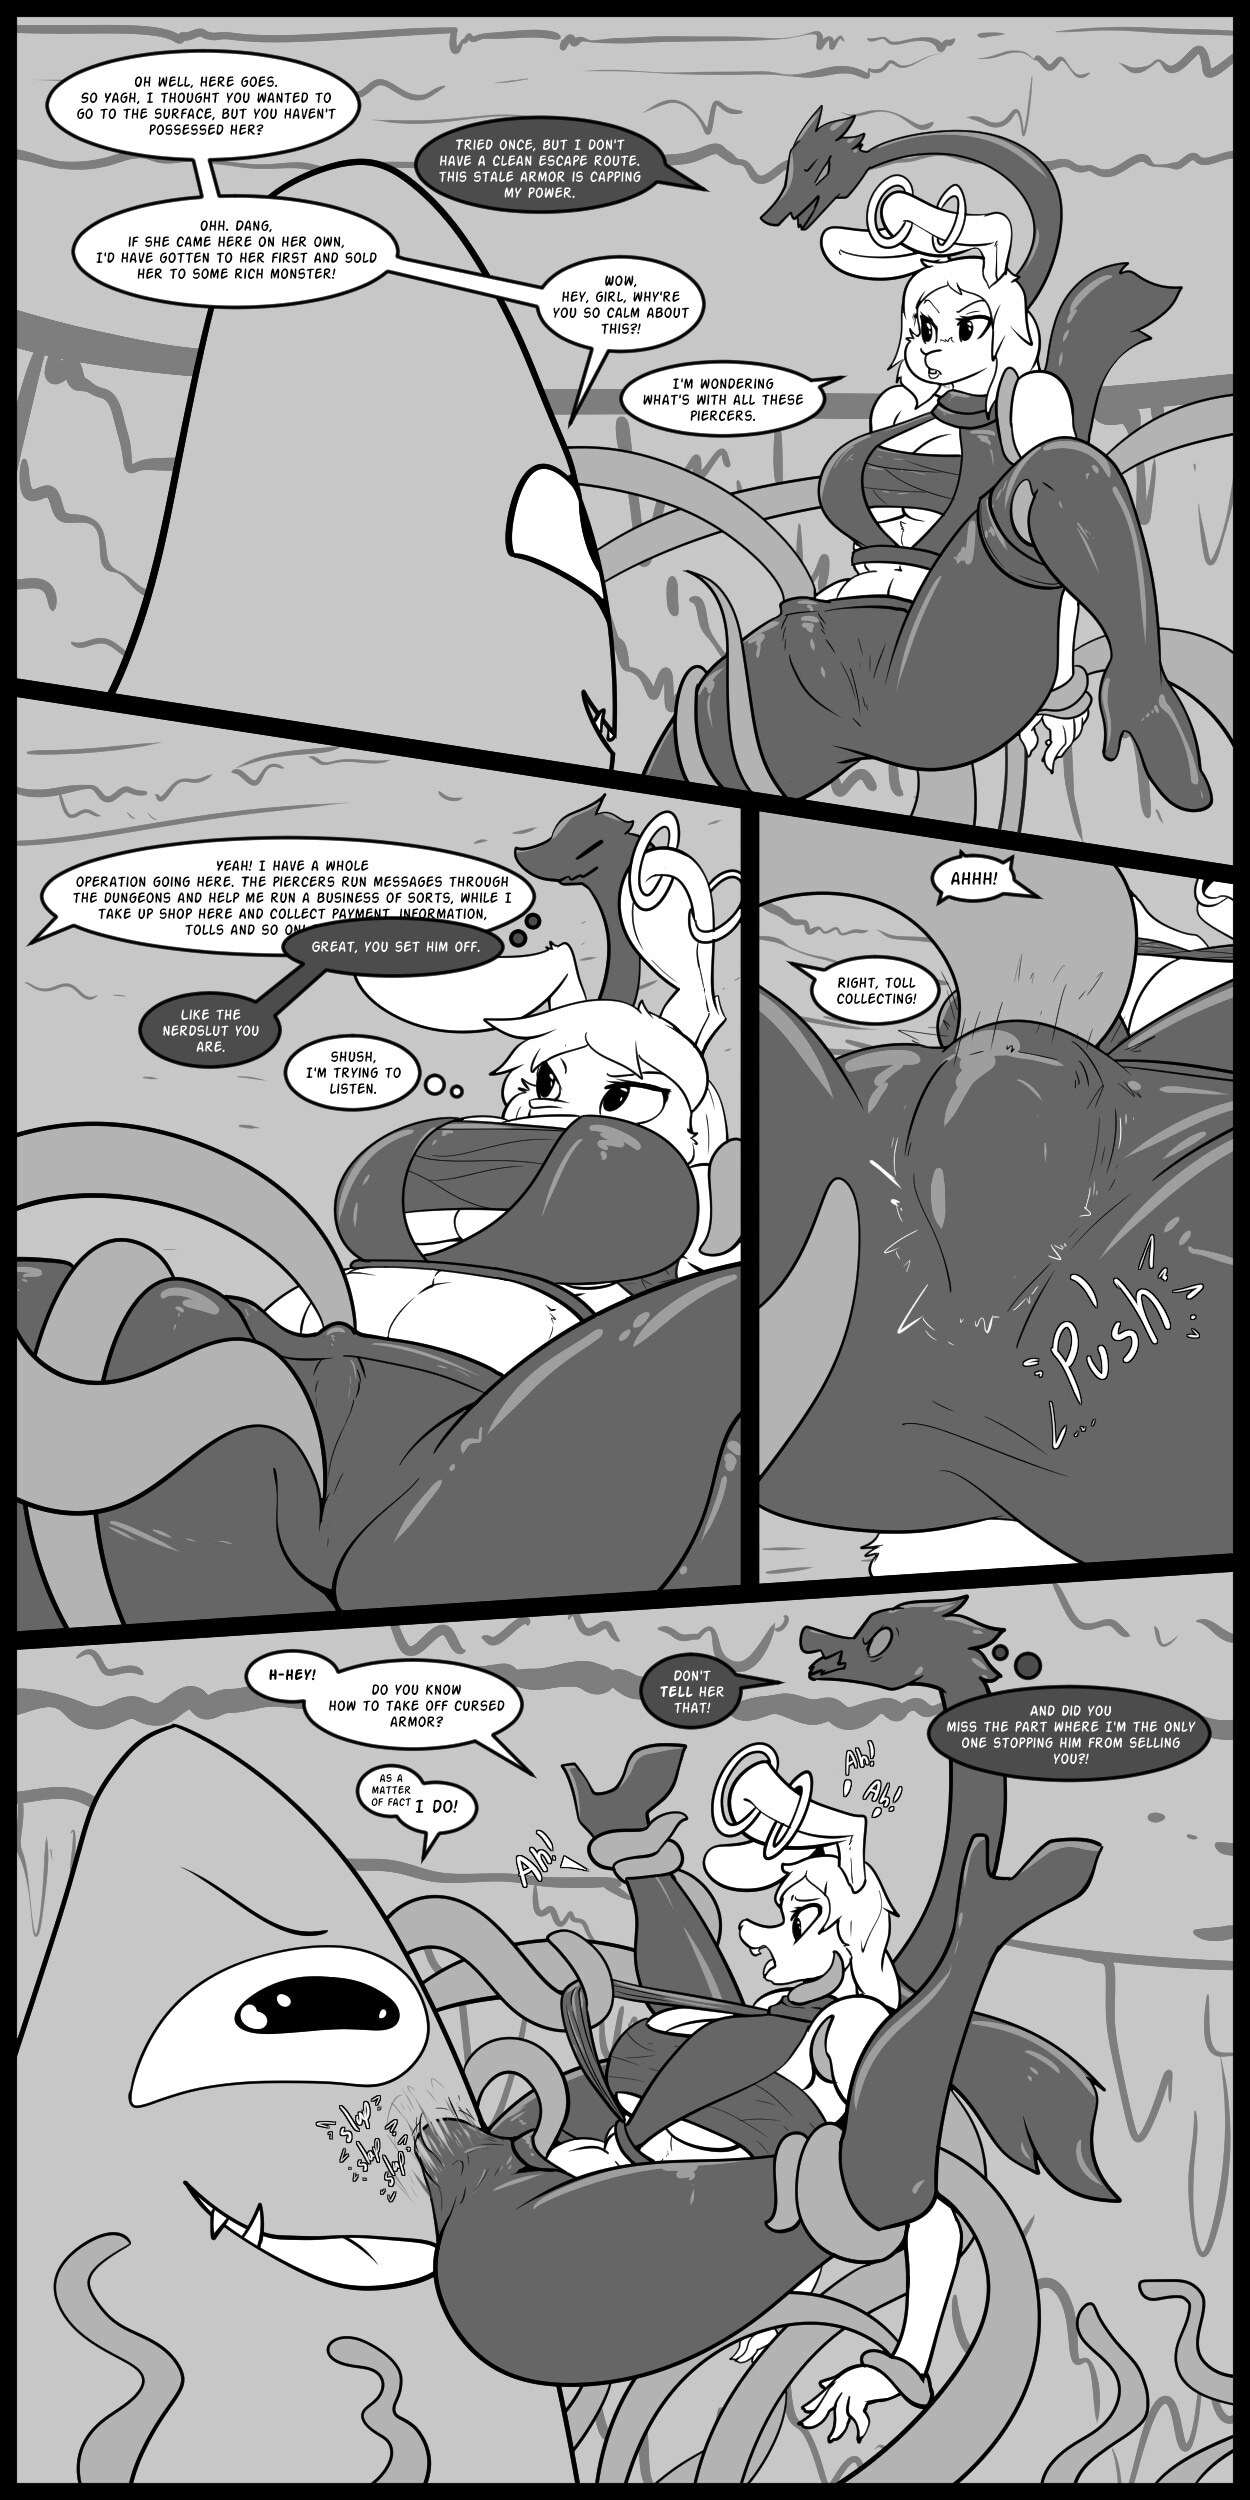 Rough Situation 2 - Page 6